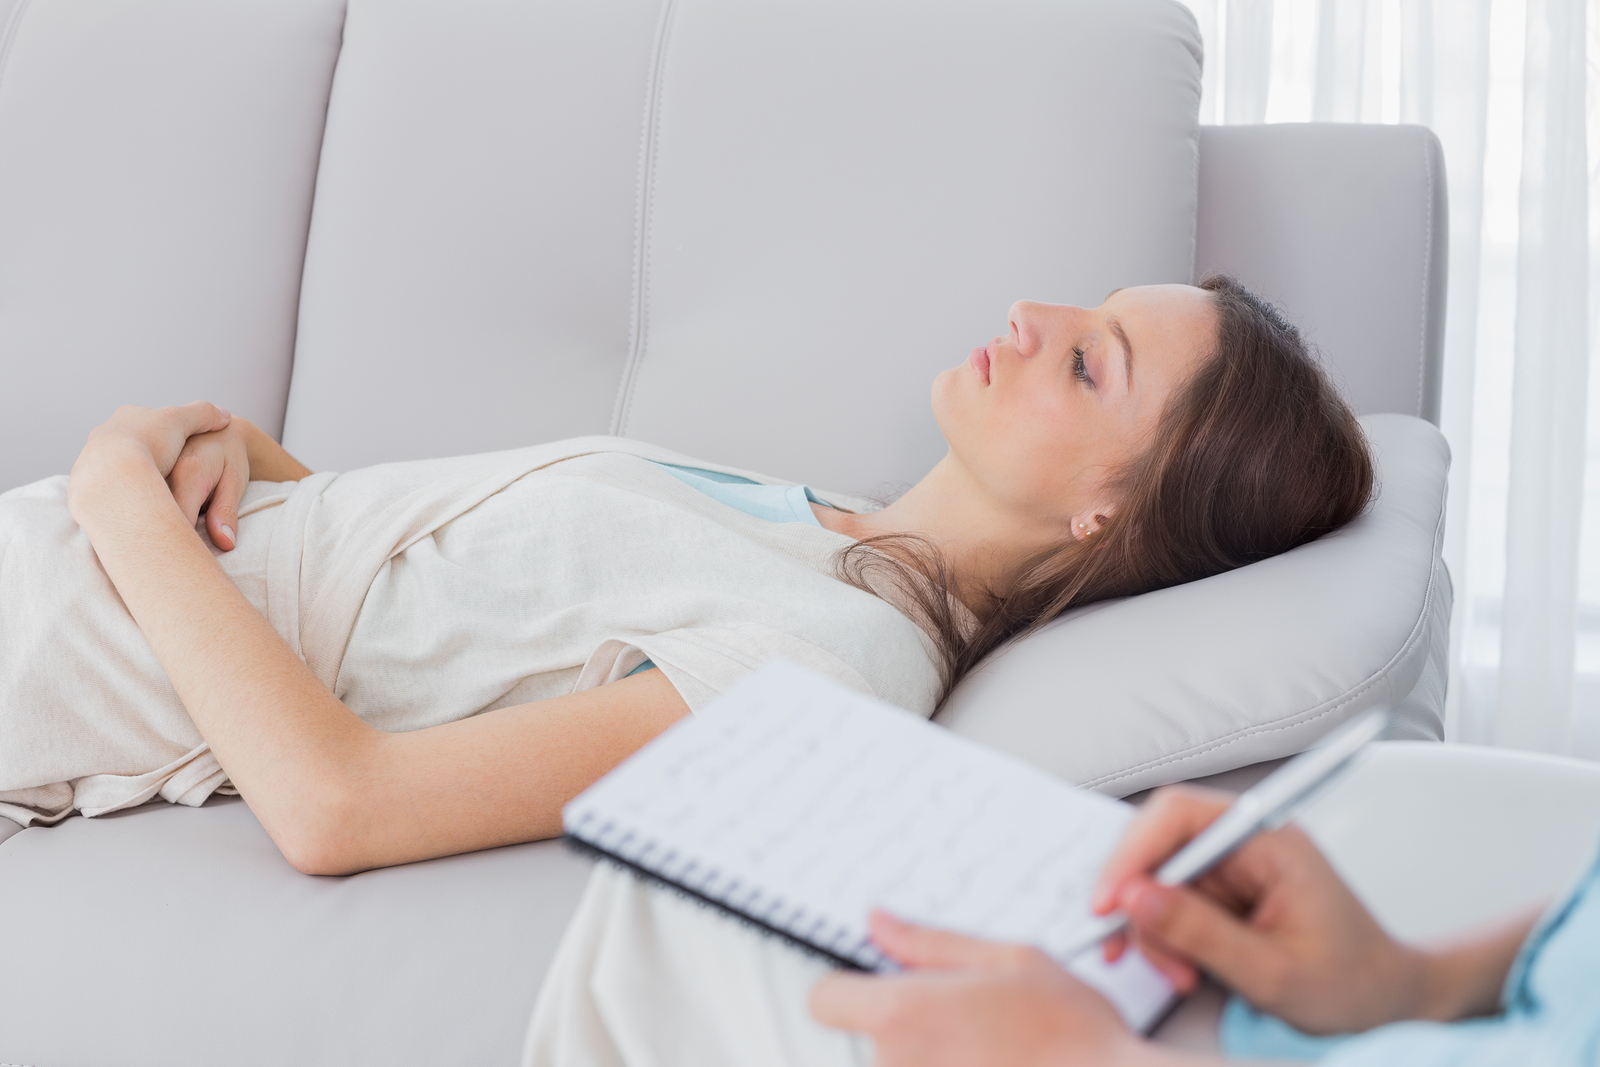 A woman lying on a sofa undergoing hypnotherapy